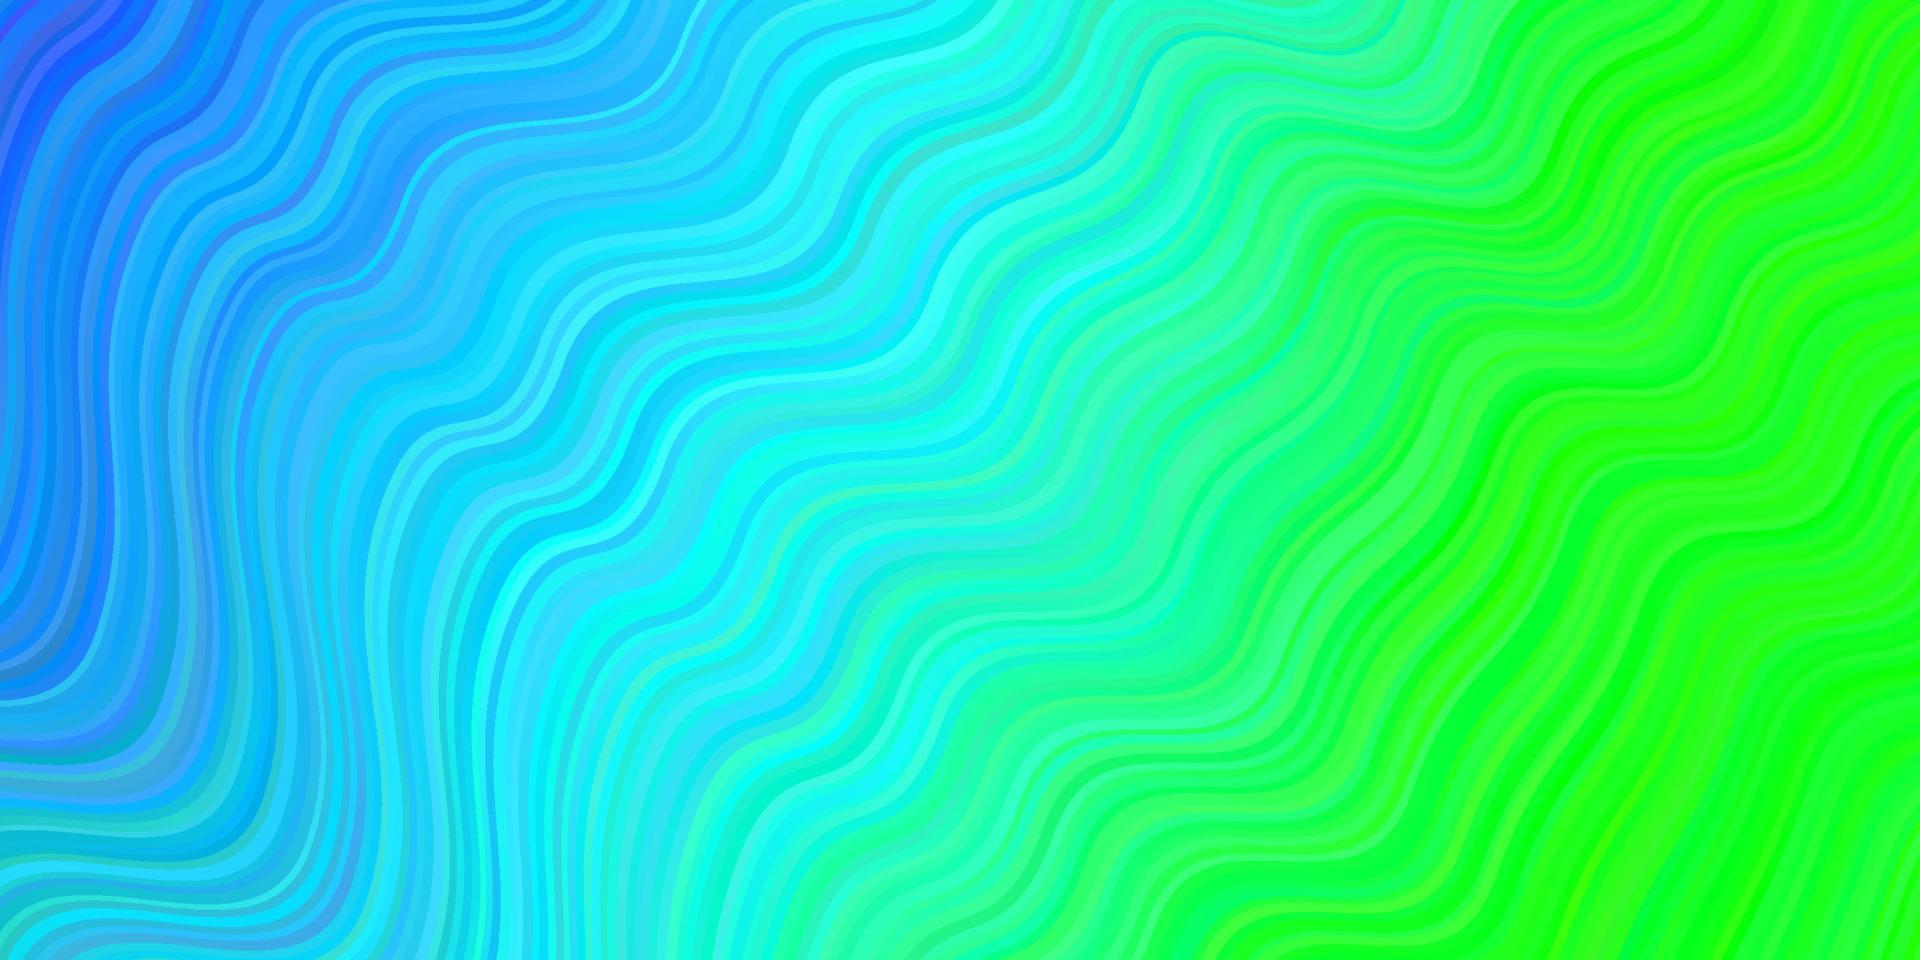 Light Blue, Green vector template with wry lines.